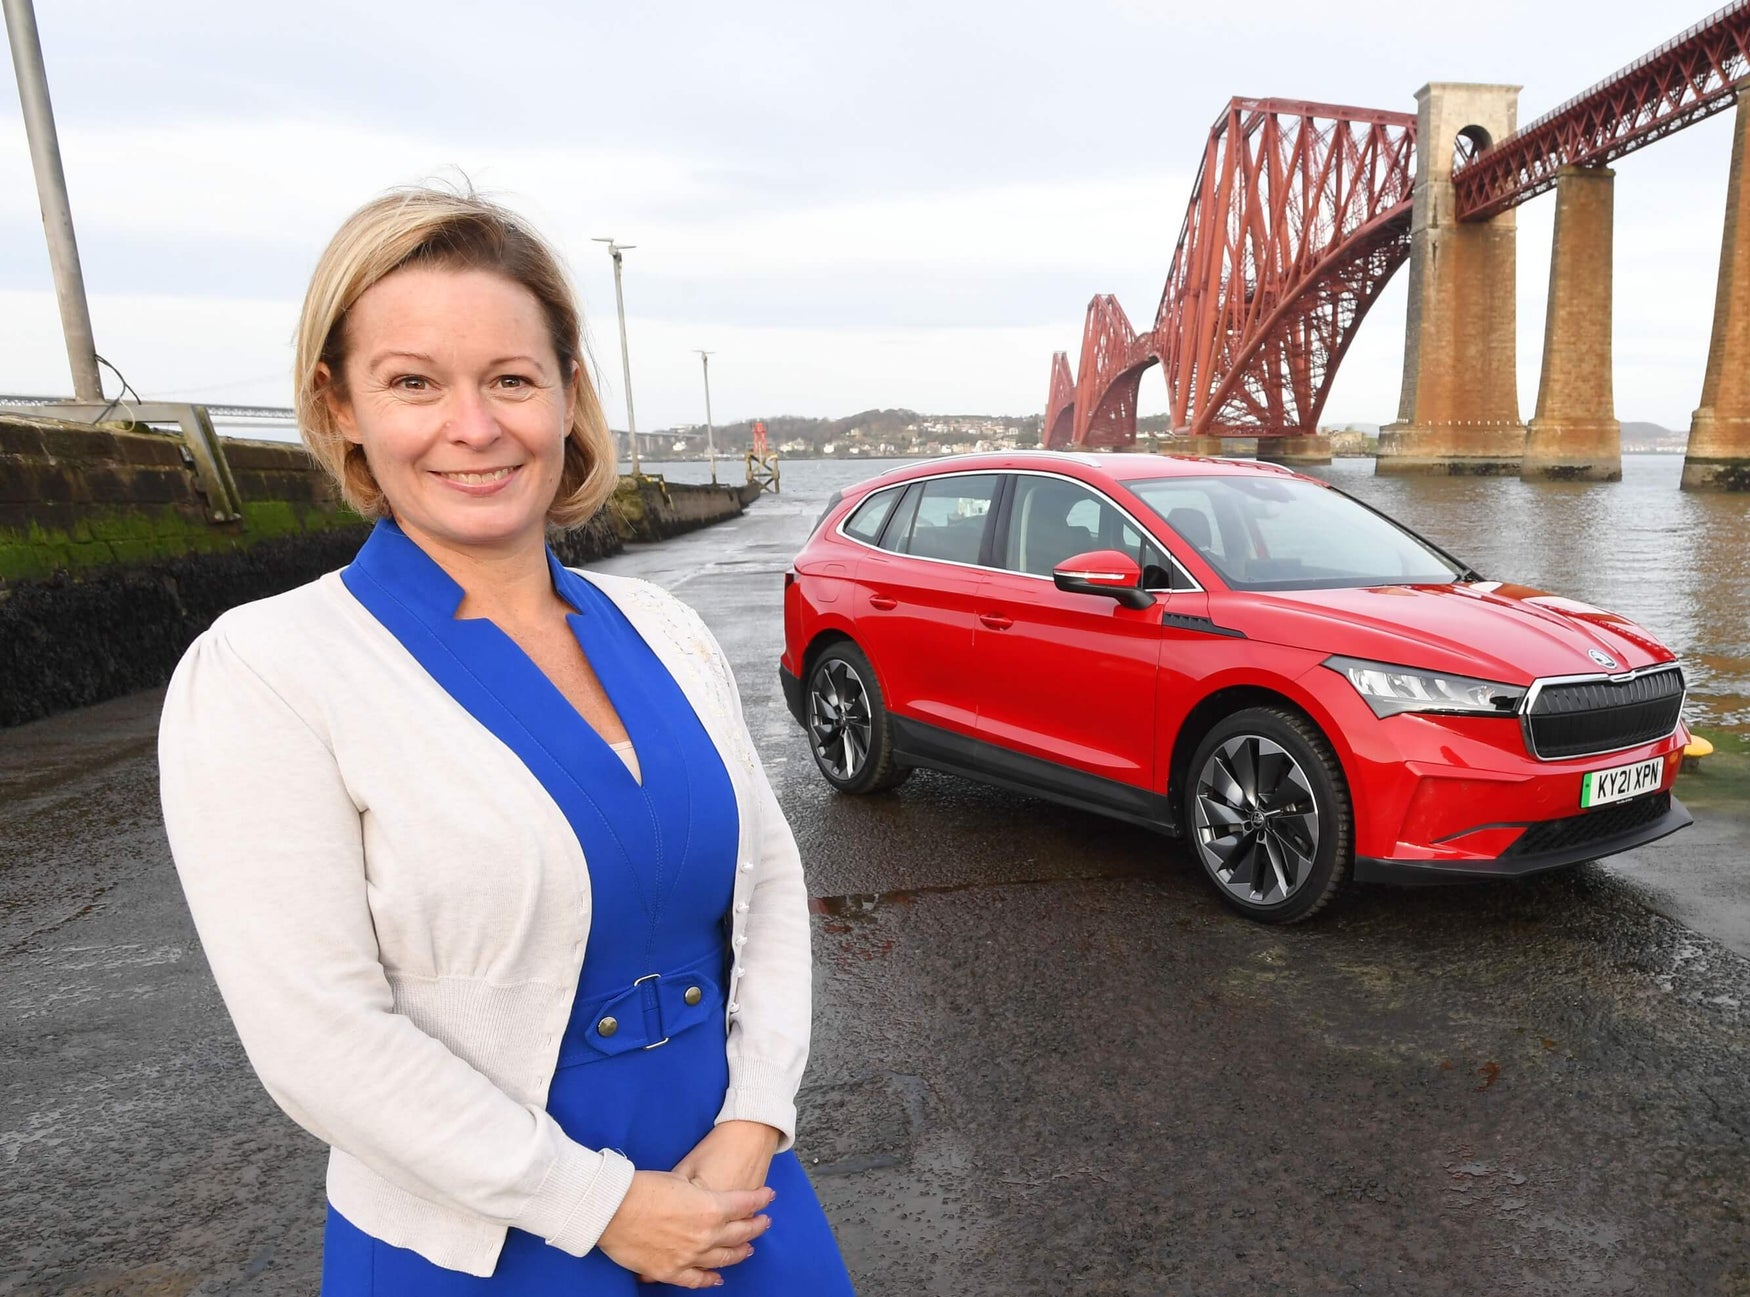 Kirsten Stagg, Head of Marketing at Skoda UK, stood in front of a red Skoda 